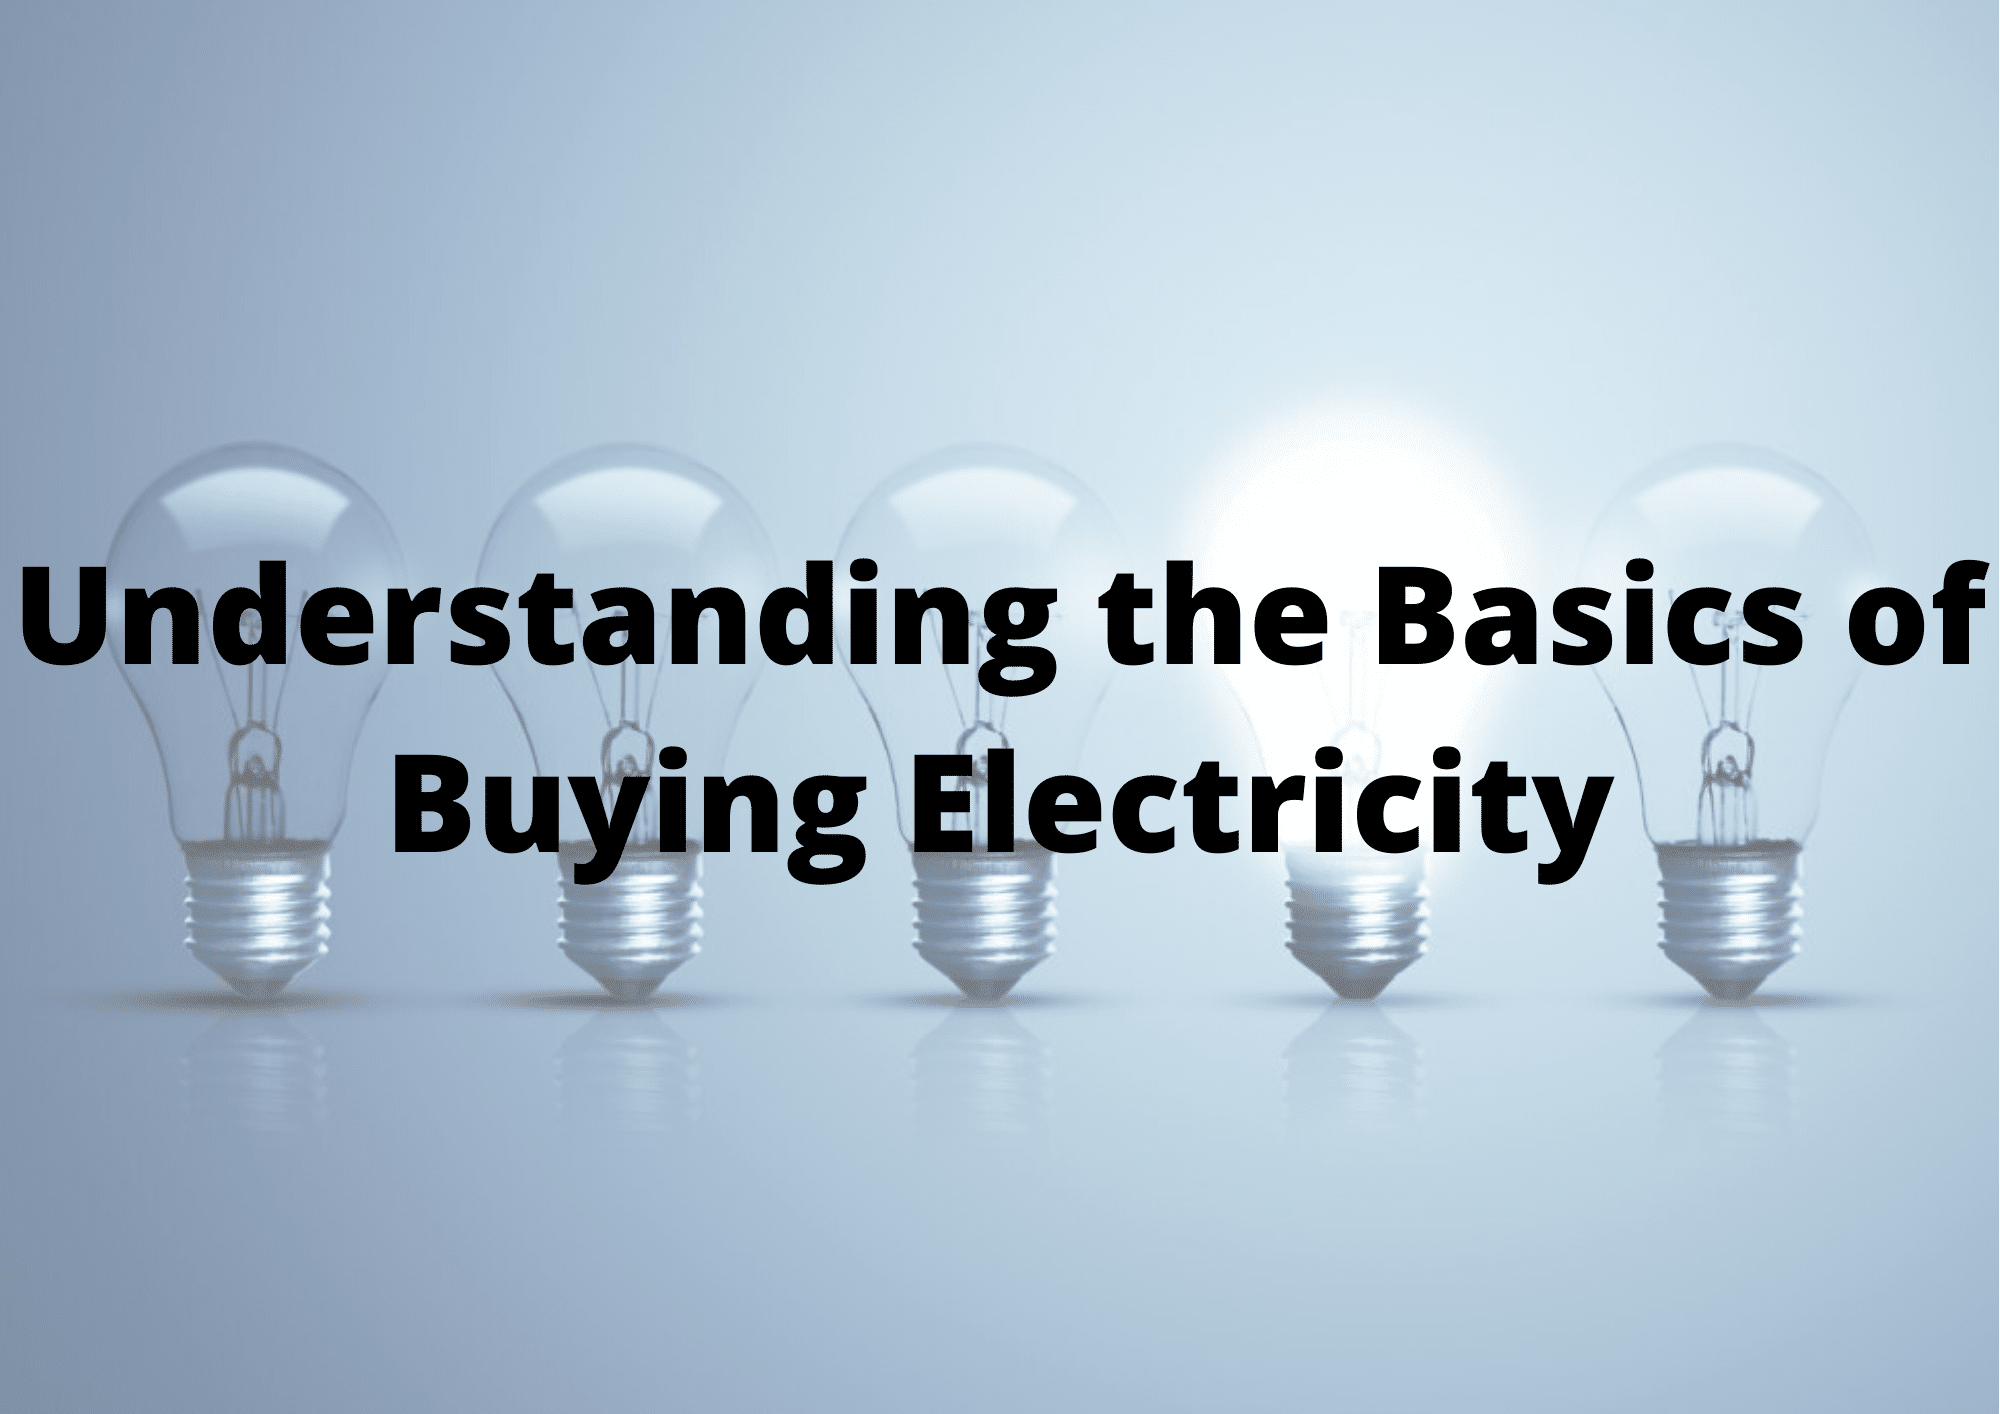 Understanding the Basics of Buying Electricity